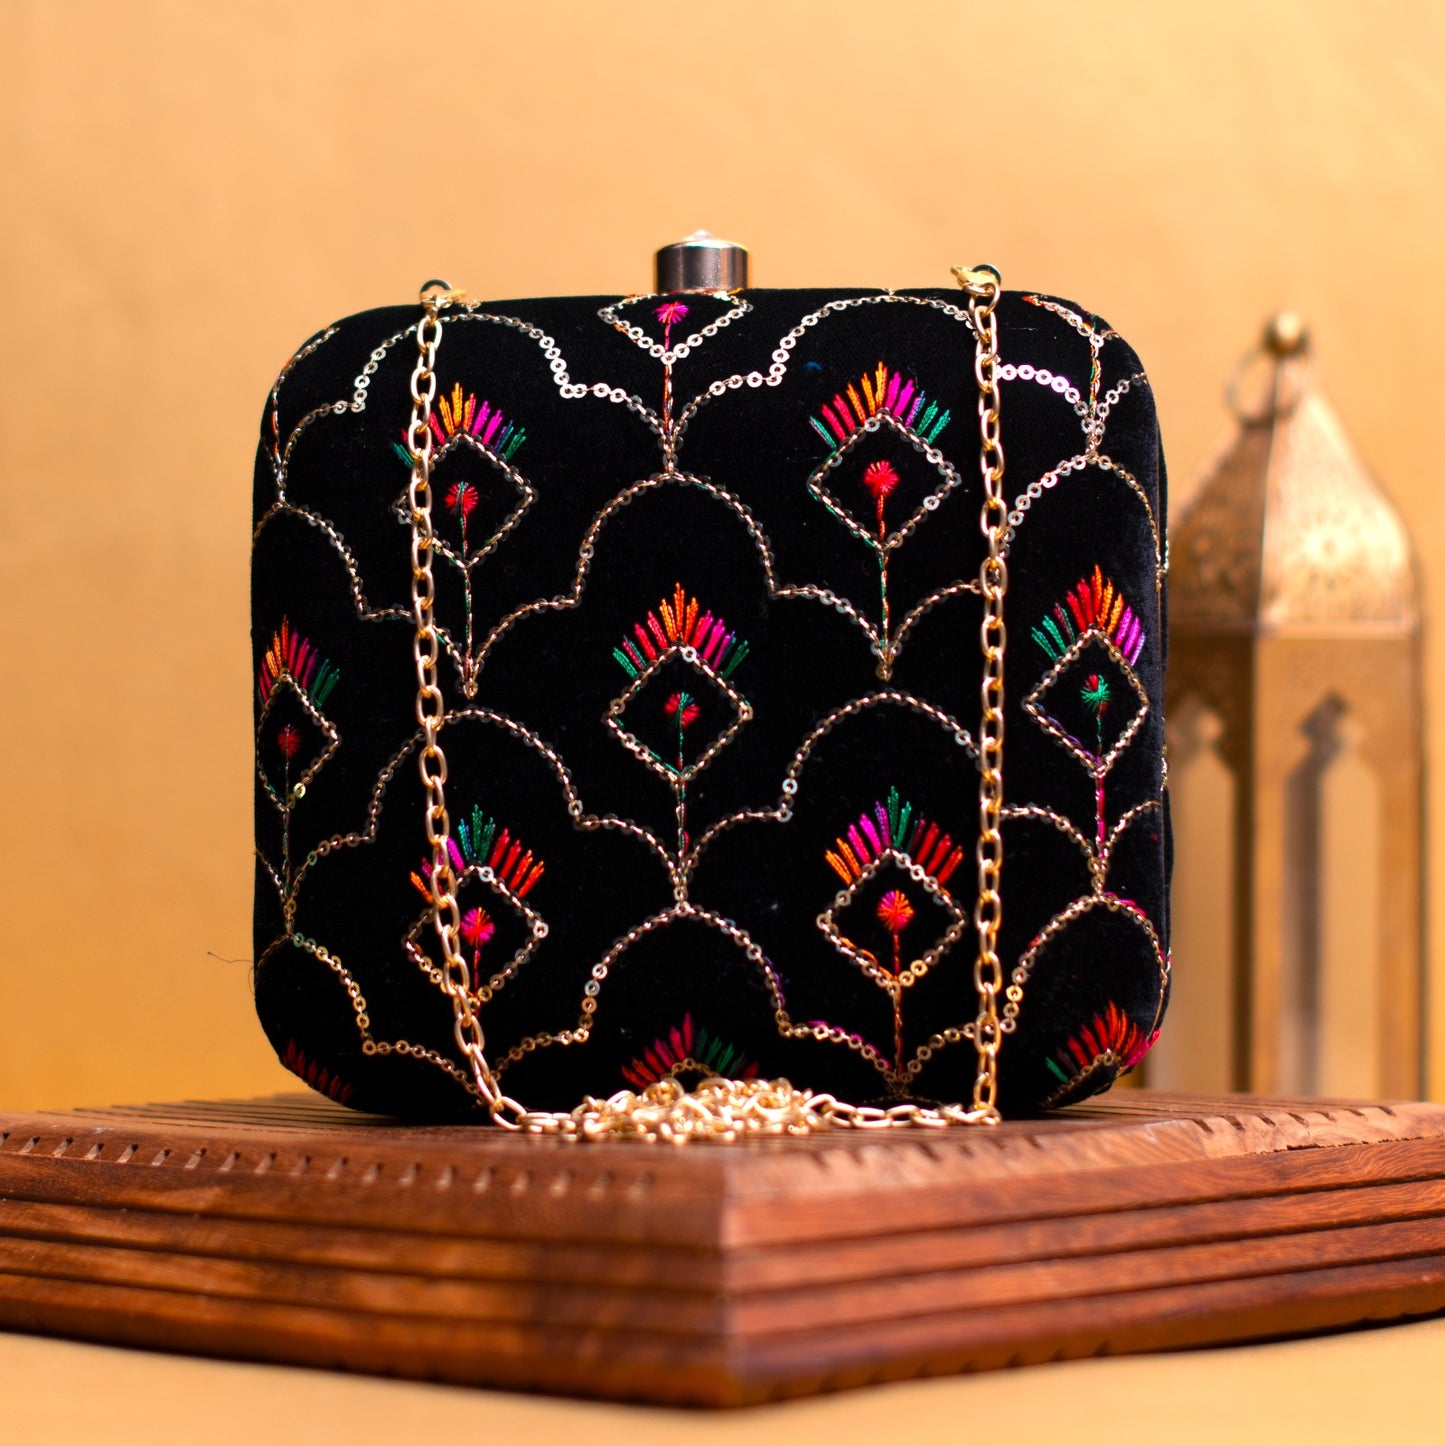 Square Embroidery Clutch